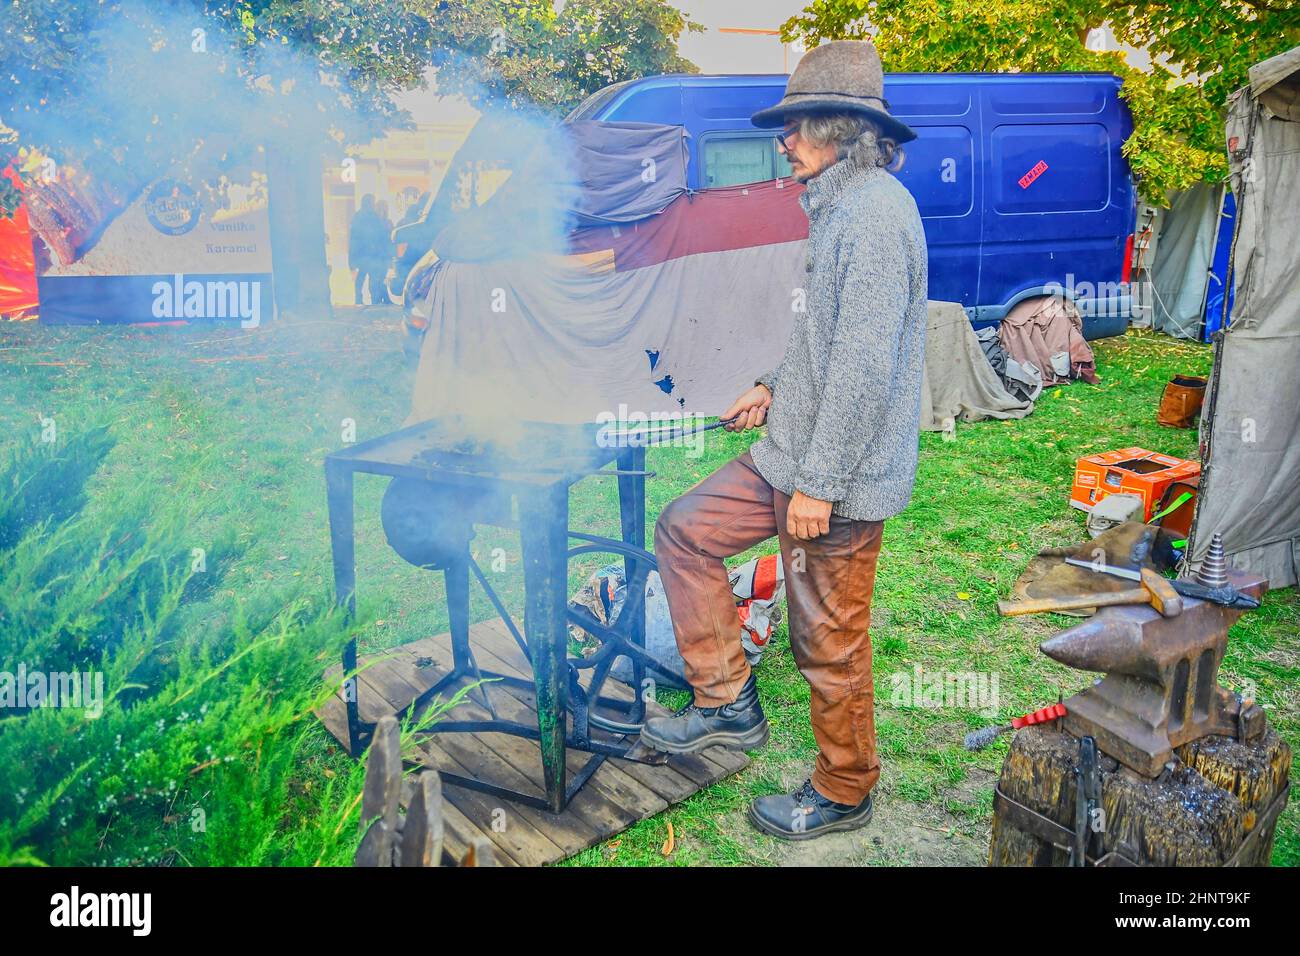 Street performer as blacksmith. Street performers can fool passersby and entertain tourists. Stock Photo